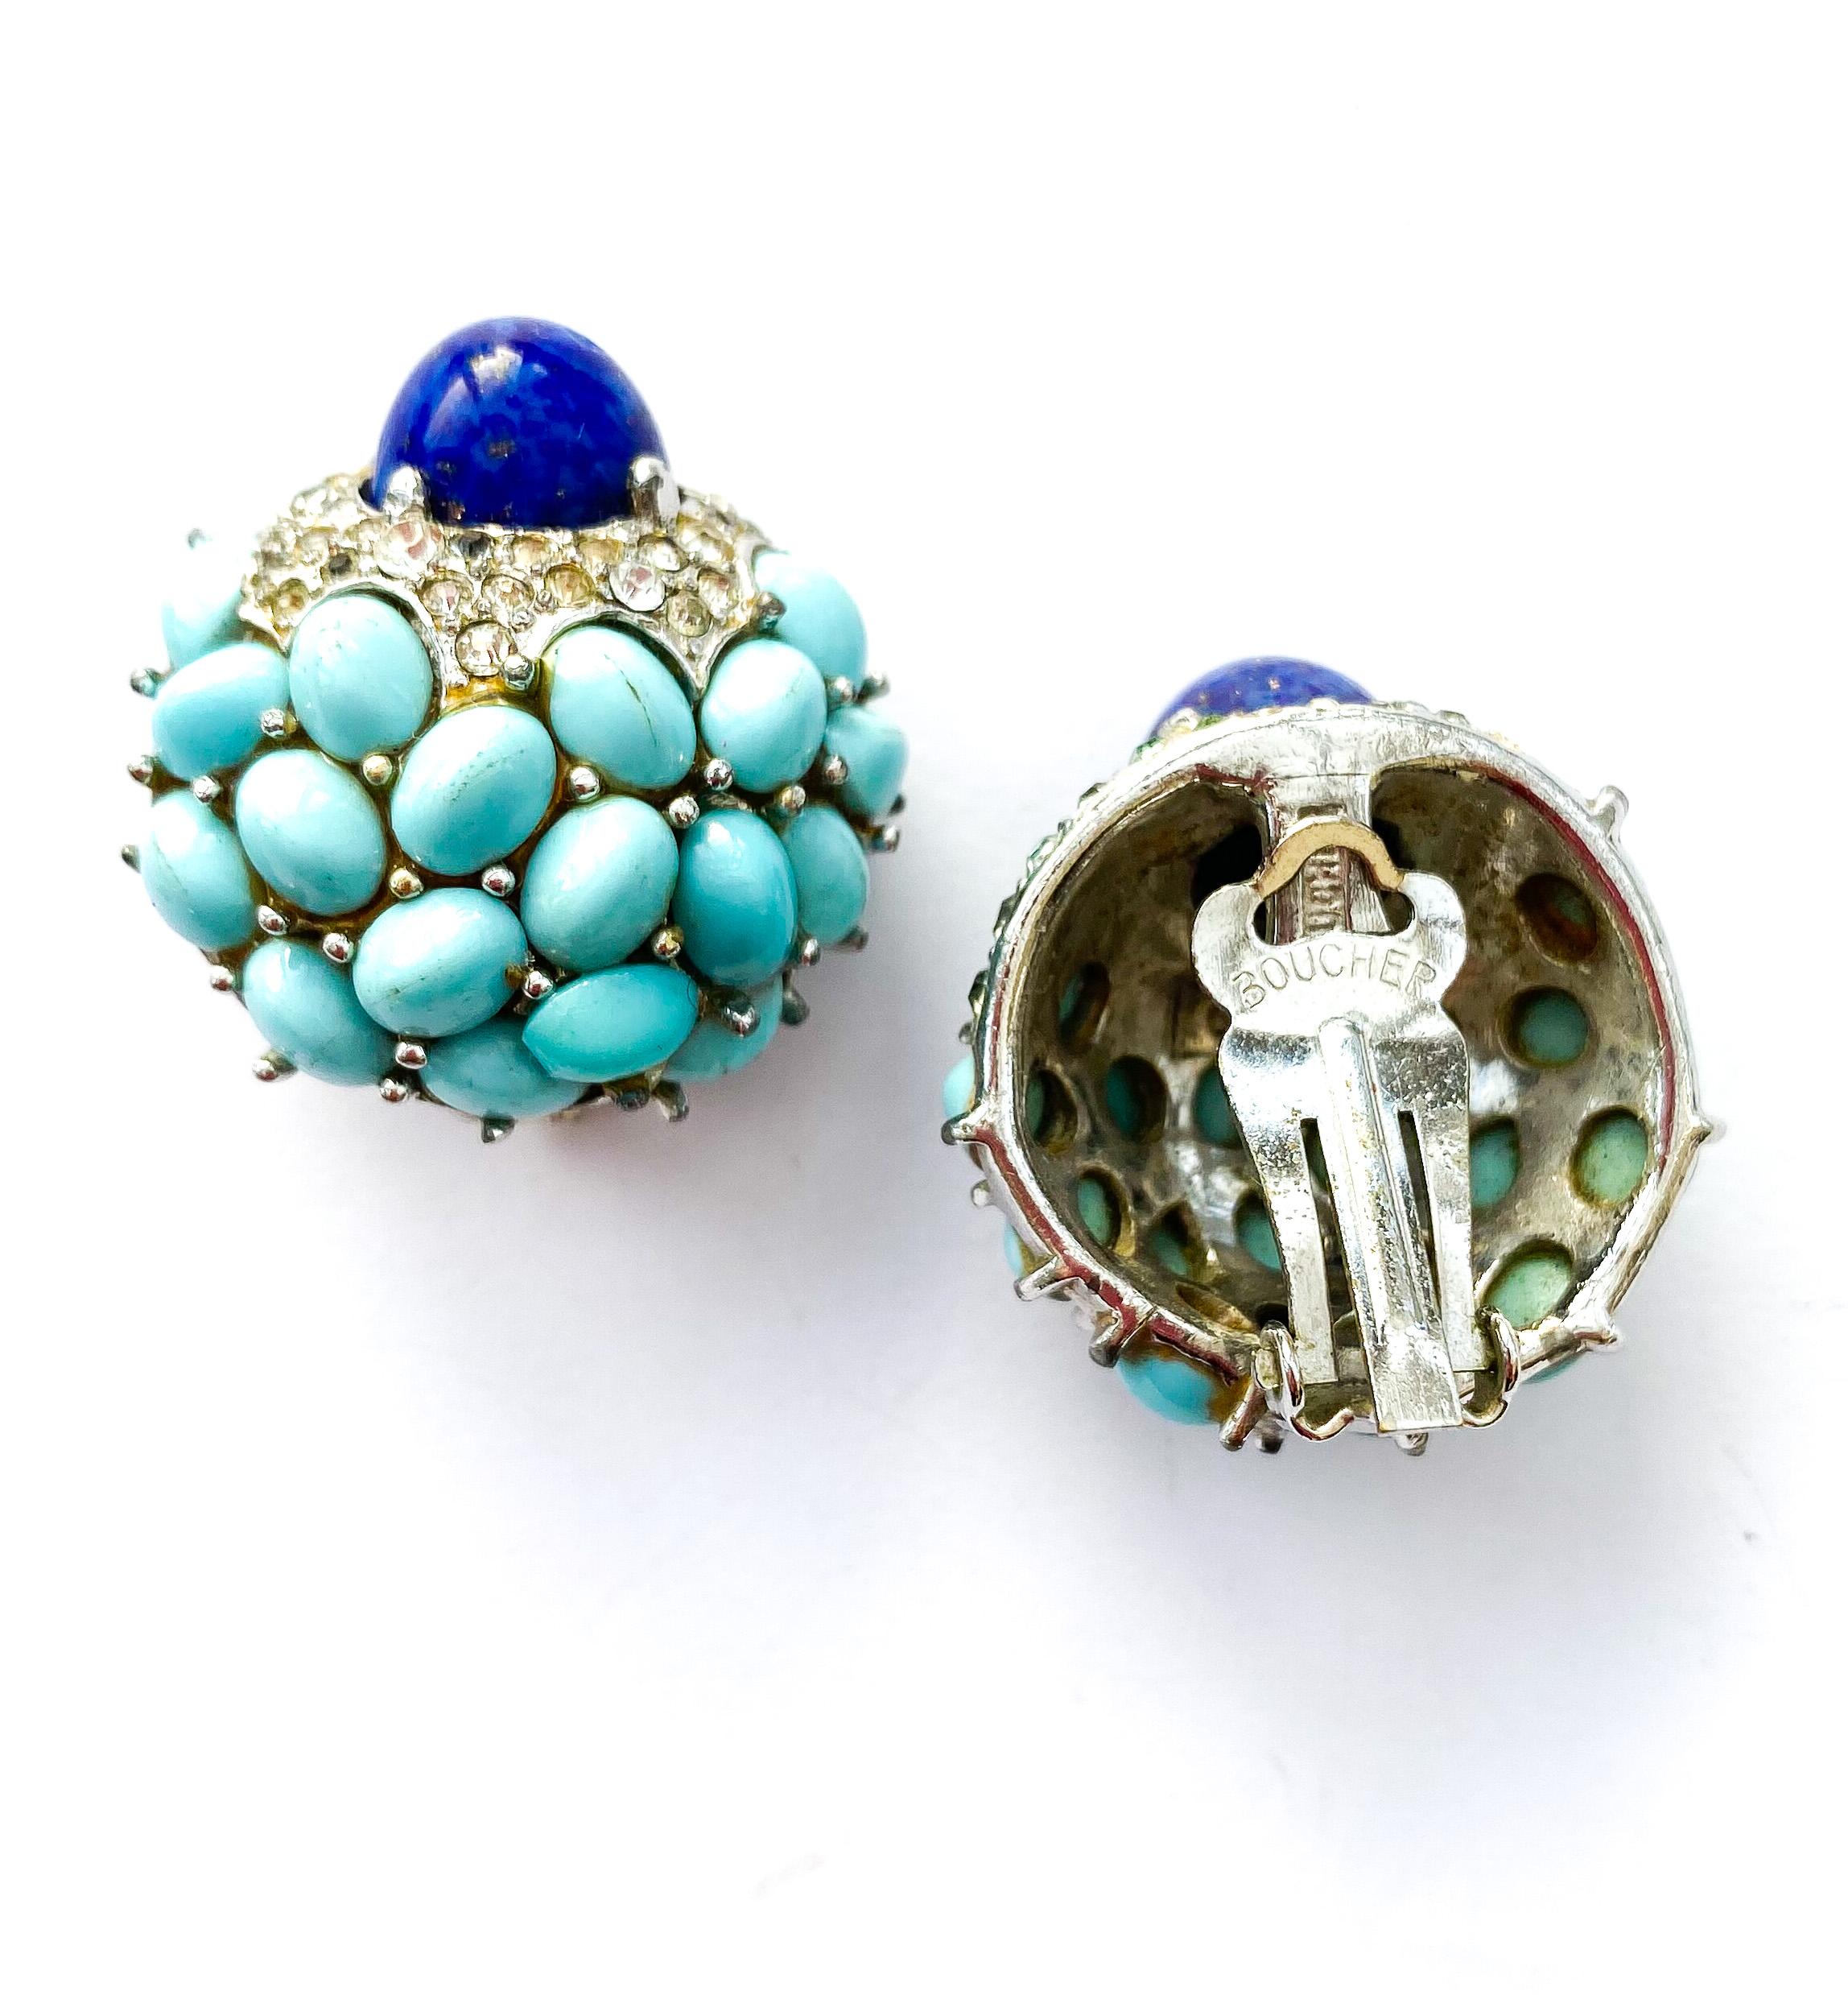 A beautiful pair of 'cluster' earrings, with turquoise cabochons, and a large lapis 'bullet' cabochon at the centre of each earring, highlighted all round with clear pastes. Echoing designs from Cartier and Van Cleef And Arpels of the same period,